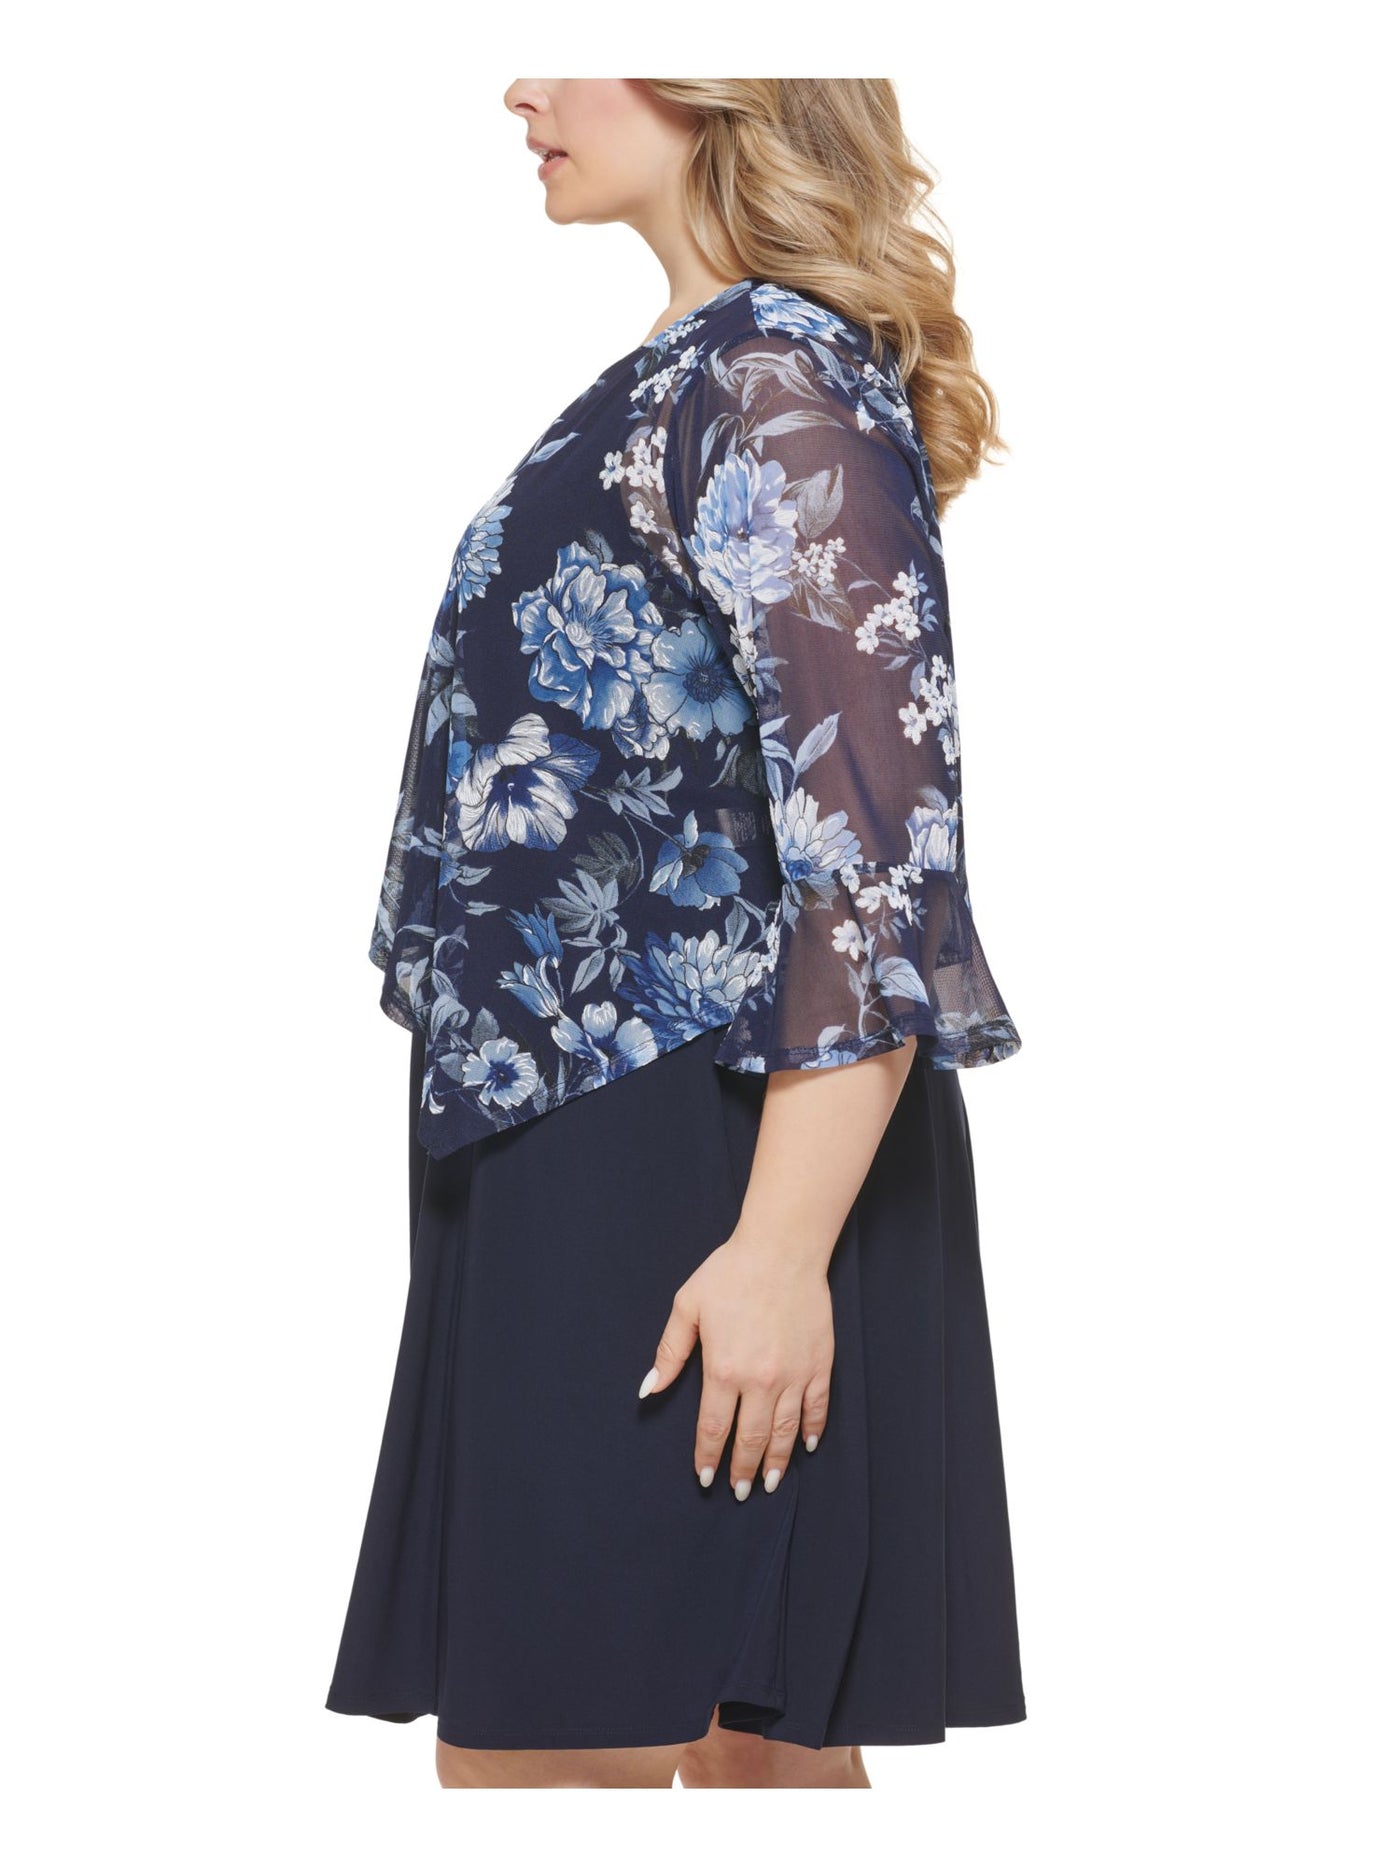 JESSICA HOWARD Womens Navy Textured Open Front Sheer 3/4 Sleeve Floral Evening Jacket Plus 16W